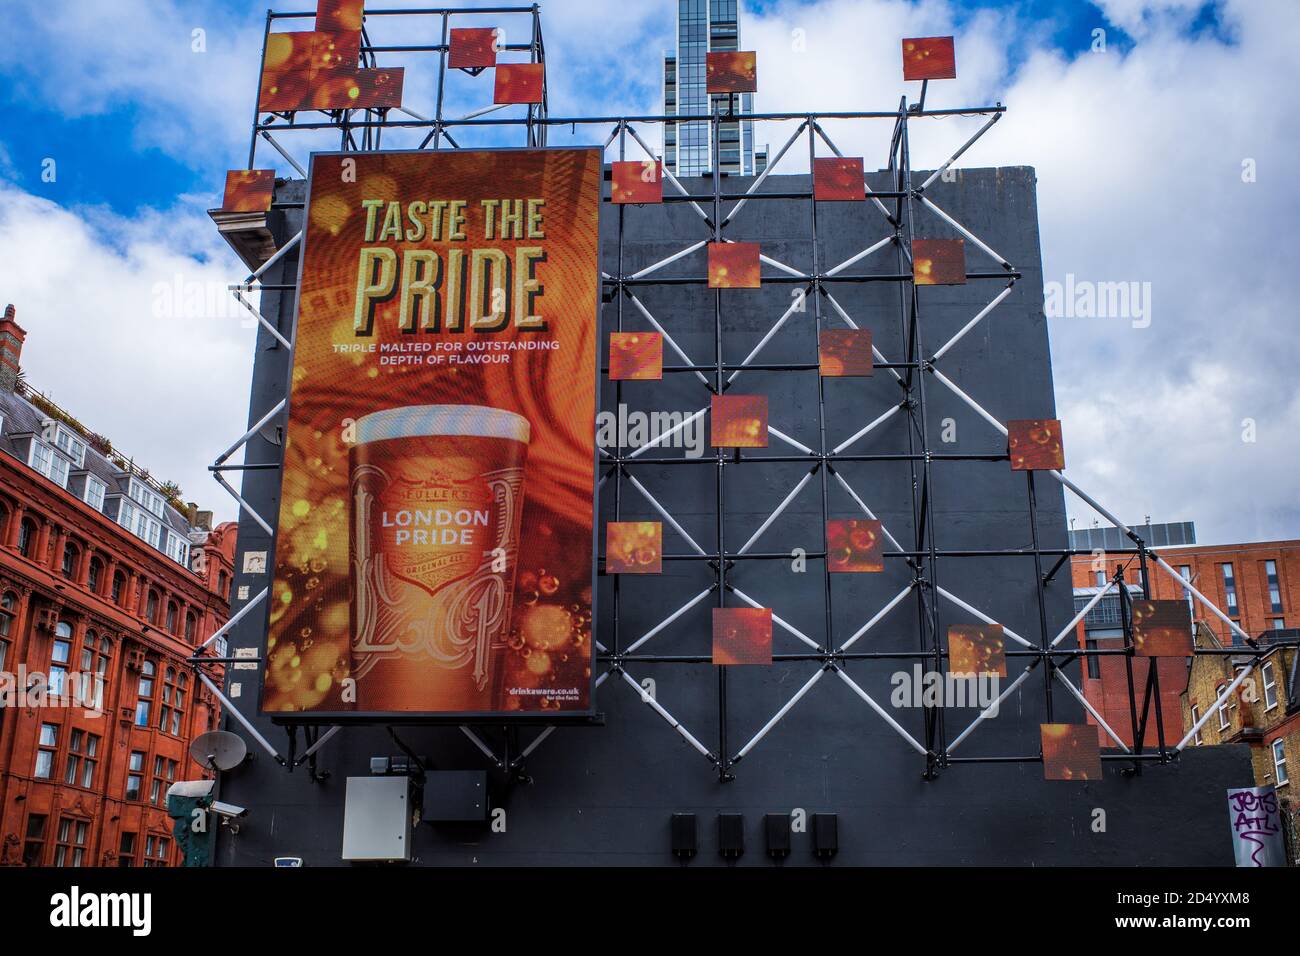 London Pride Beer advert near Old Street roundabout central London. Taste the Pride Advert Stock Photo